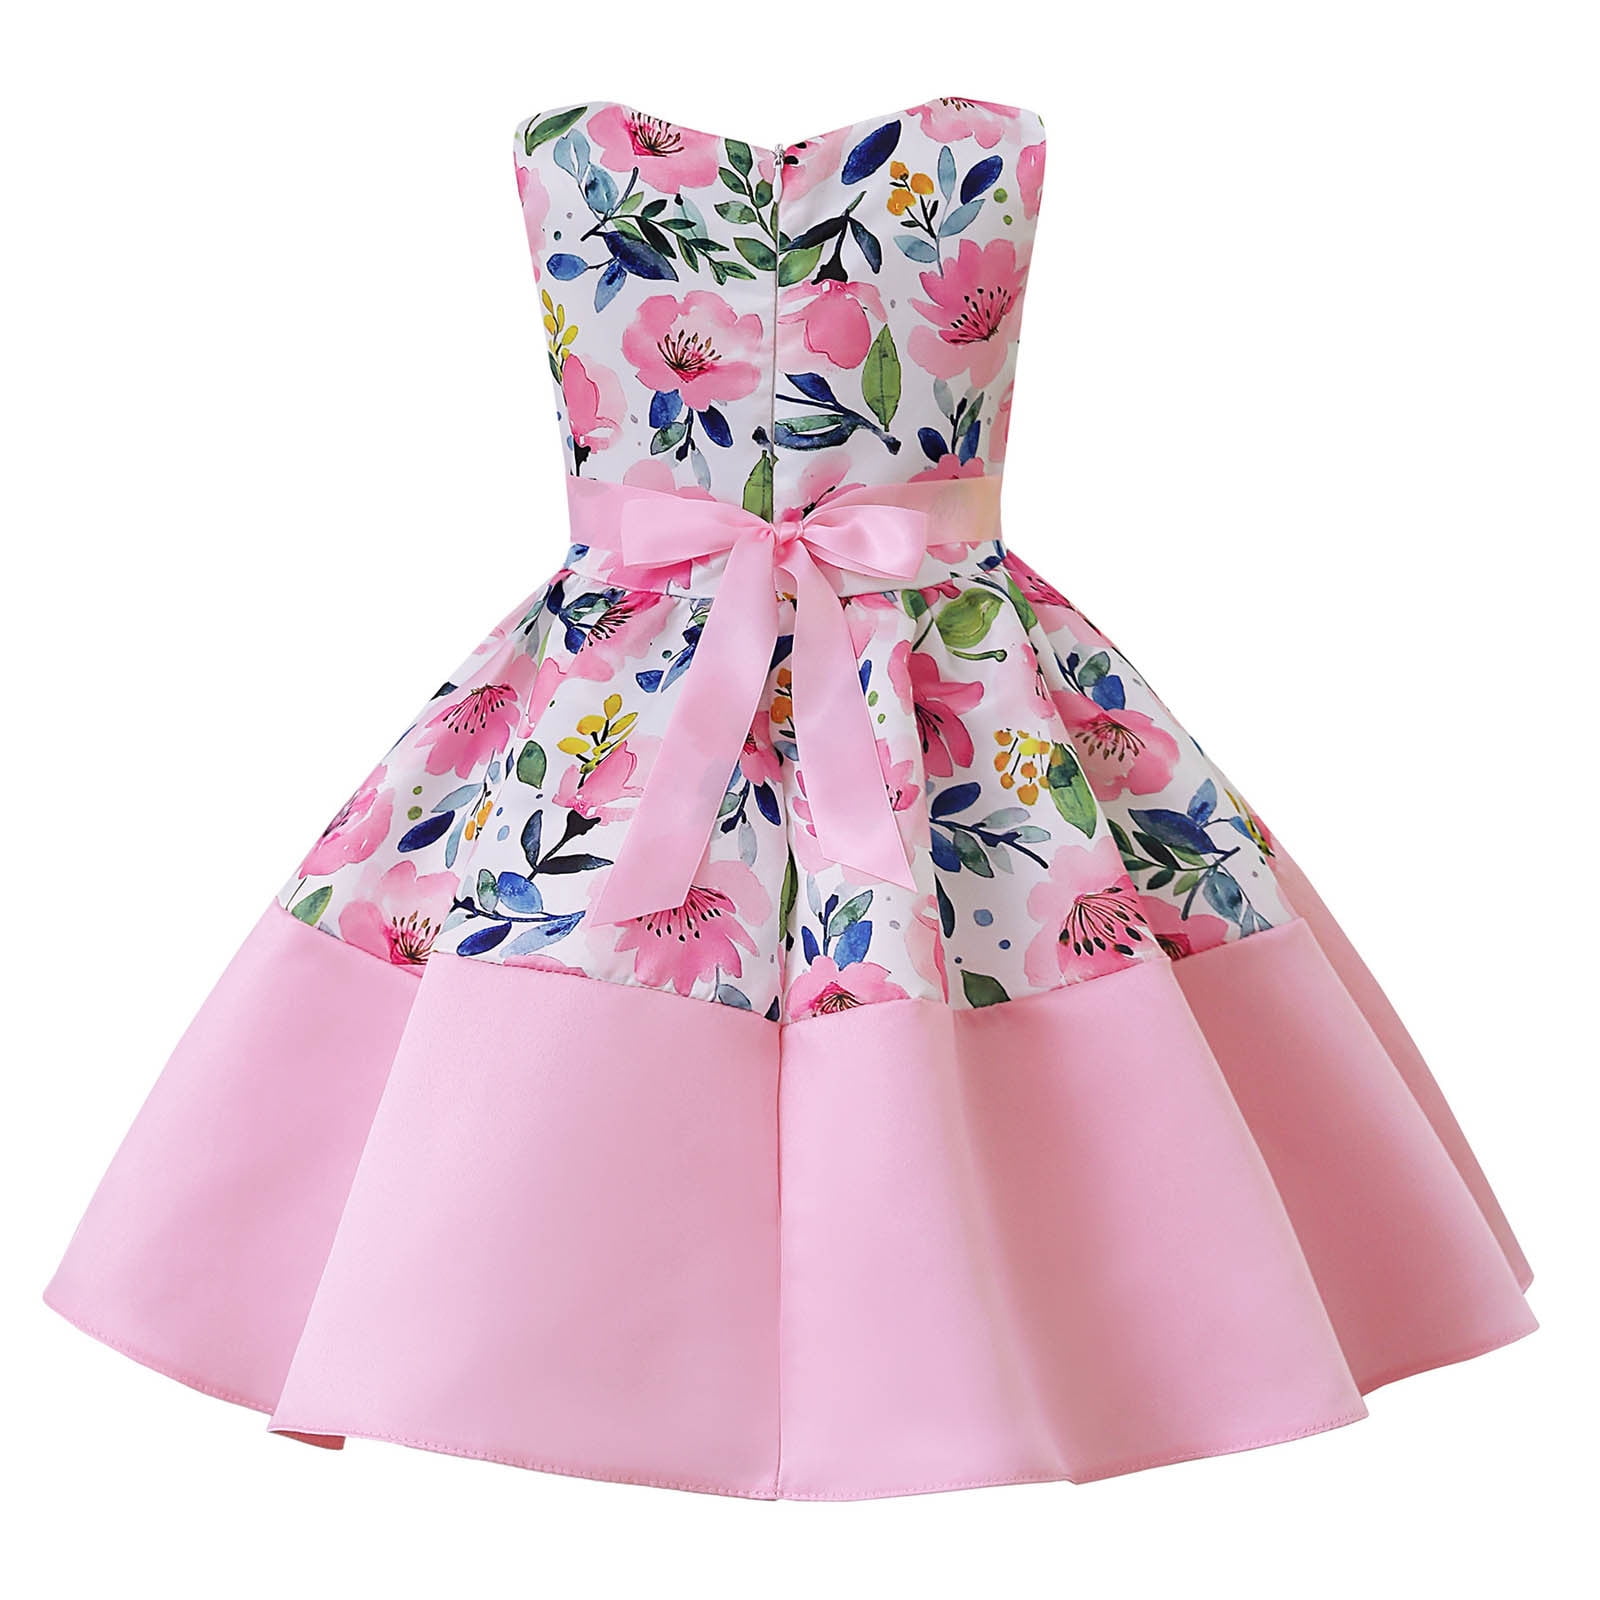 dresses for 9 year olds